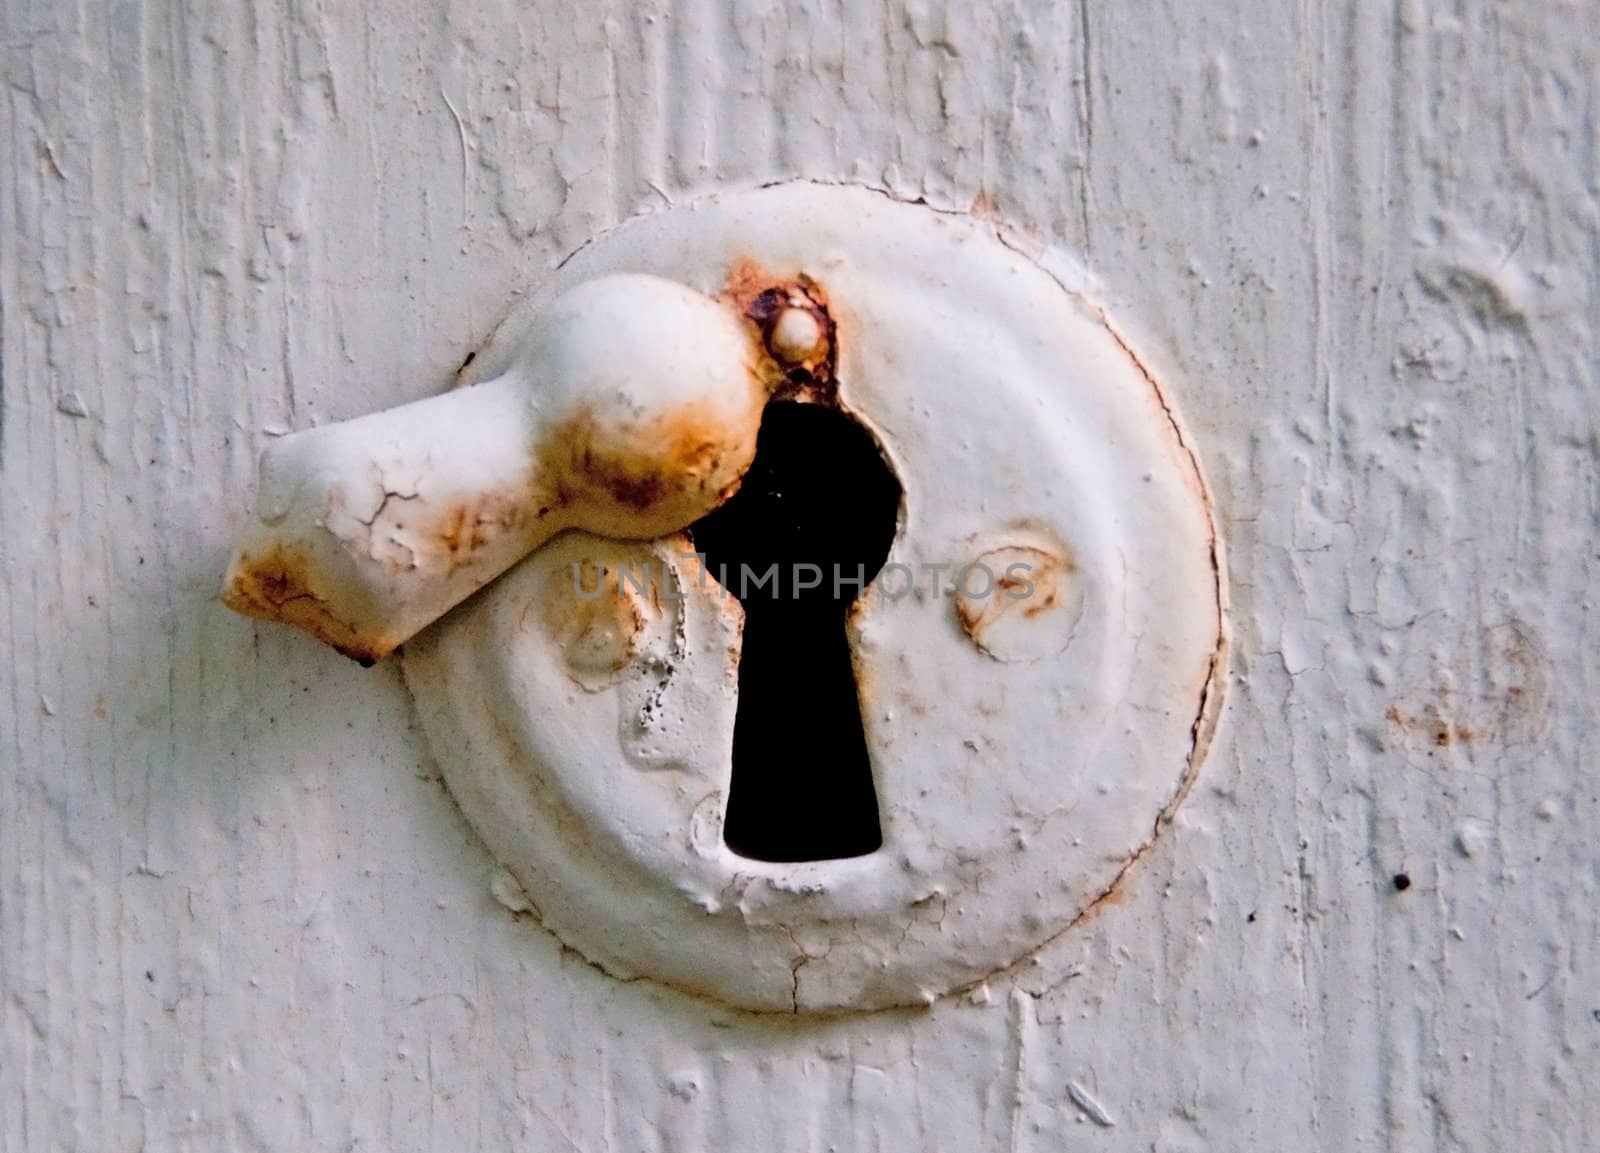 A white old fashioned keyhole with escutcheon